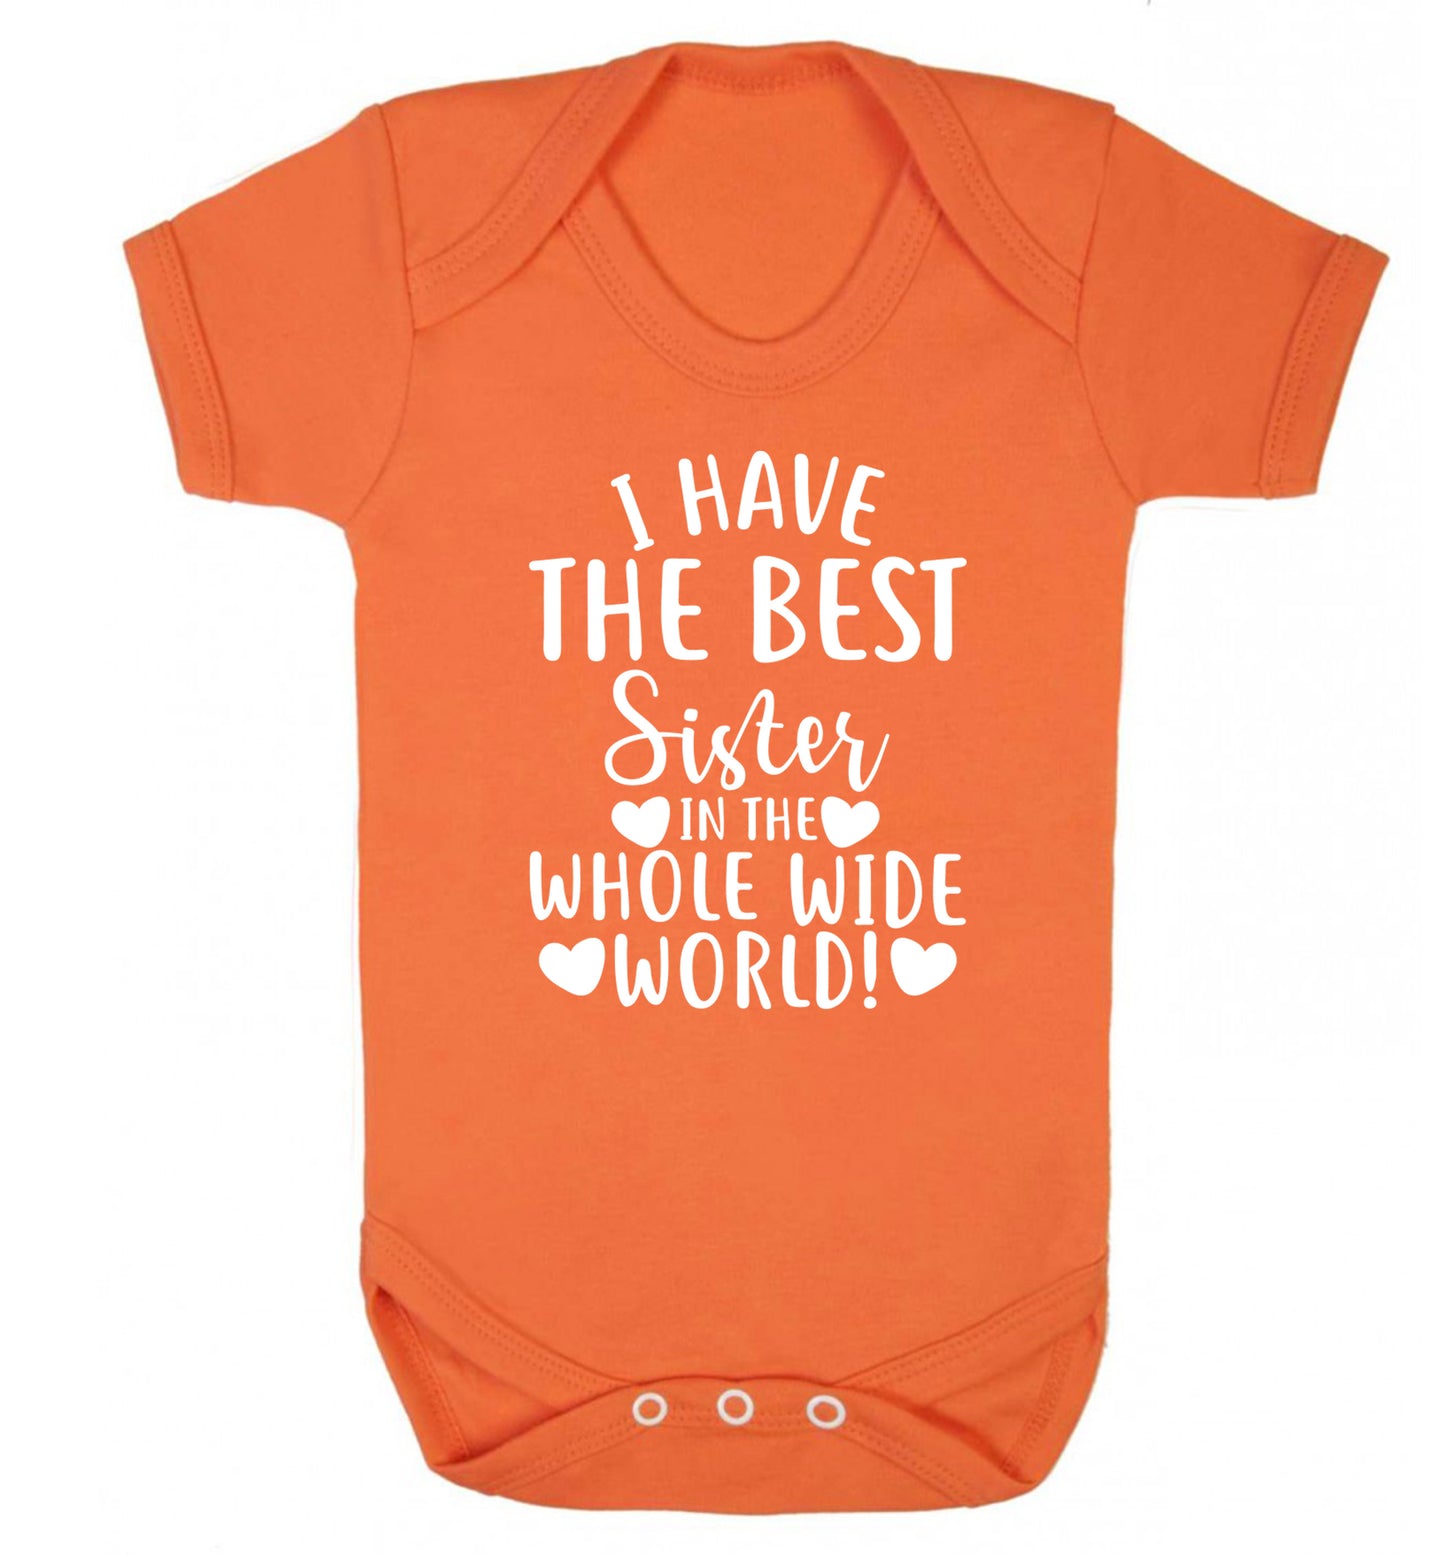 I have the best sister in the whole wide world! Baby Vest orange 18-24 months